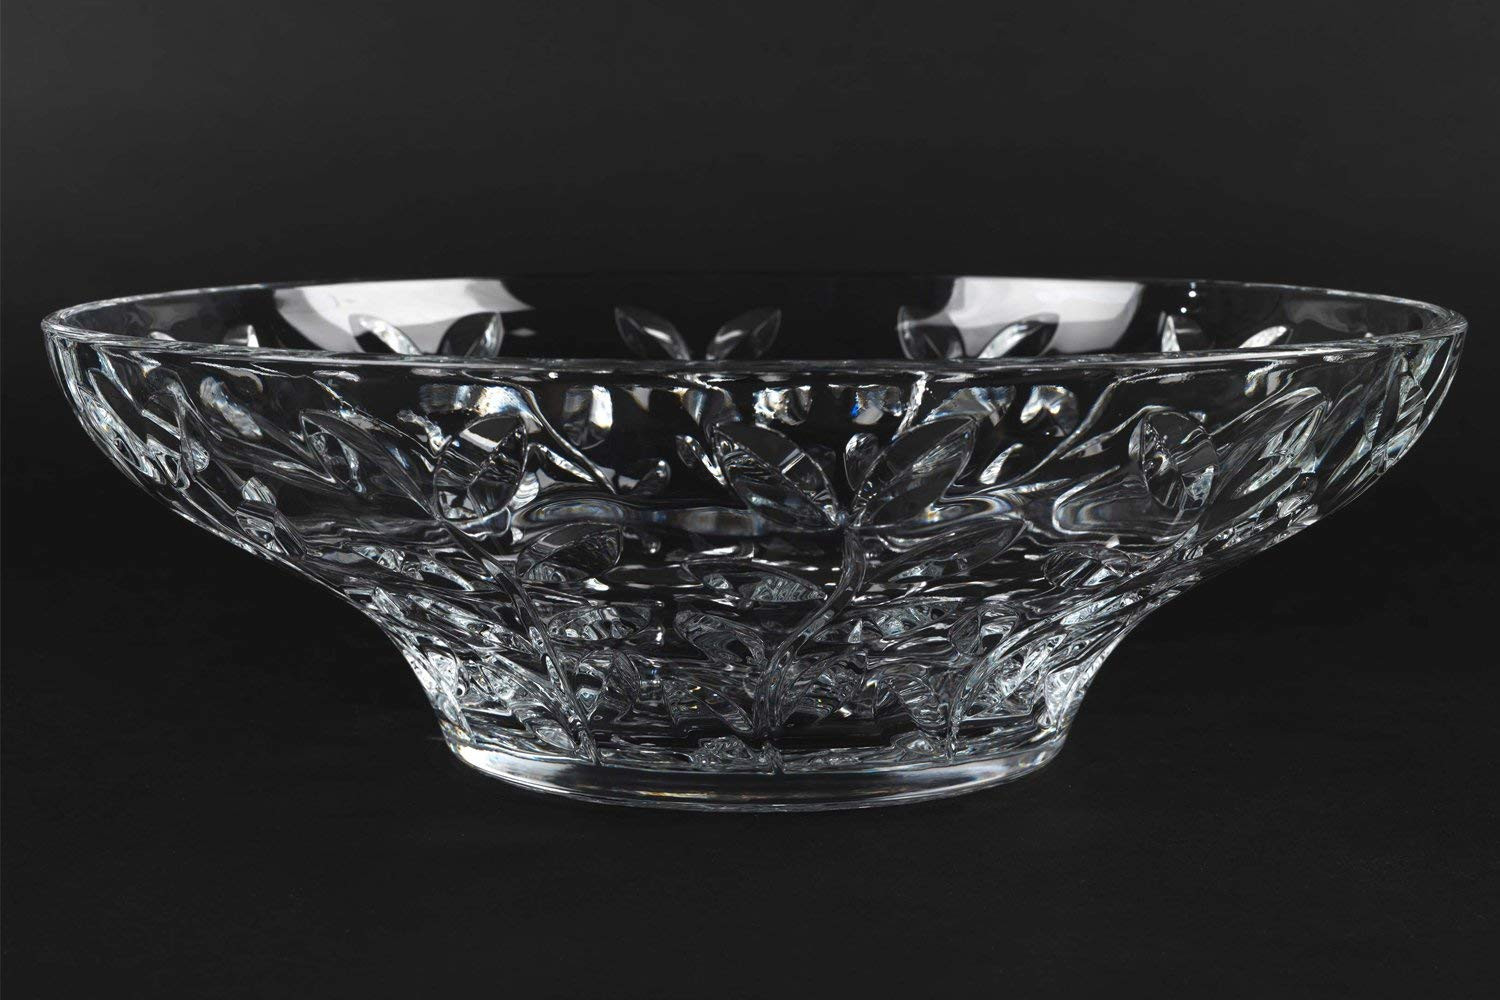 16 Wonderful Rcr Crystal Vase Price 2024 free download rcr crystal vase price of rcr 25593020006 laurus glass decorative centrepiece fruit bowl intended for rcr 25593020006 laurus glass decorative centrepiece fruit bowl crystal 31 x 31 x 11 cm a